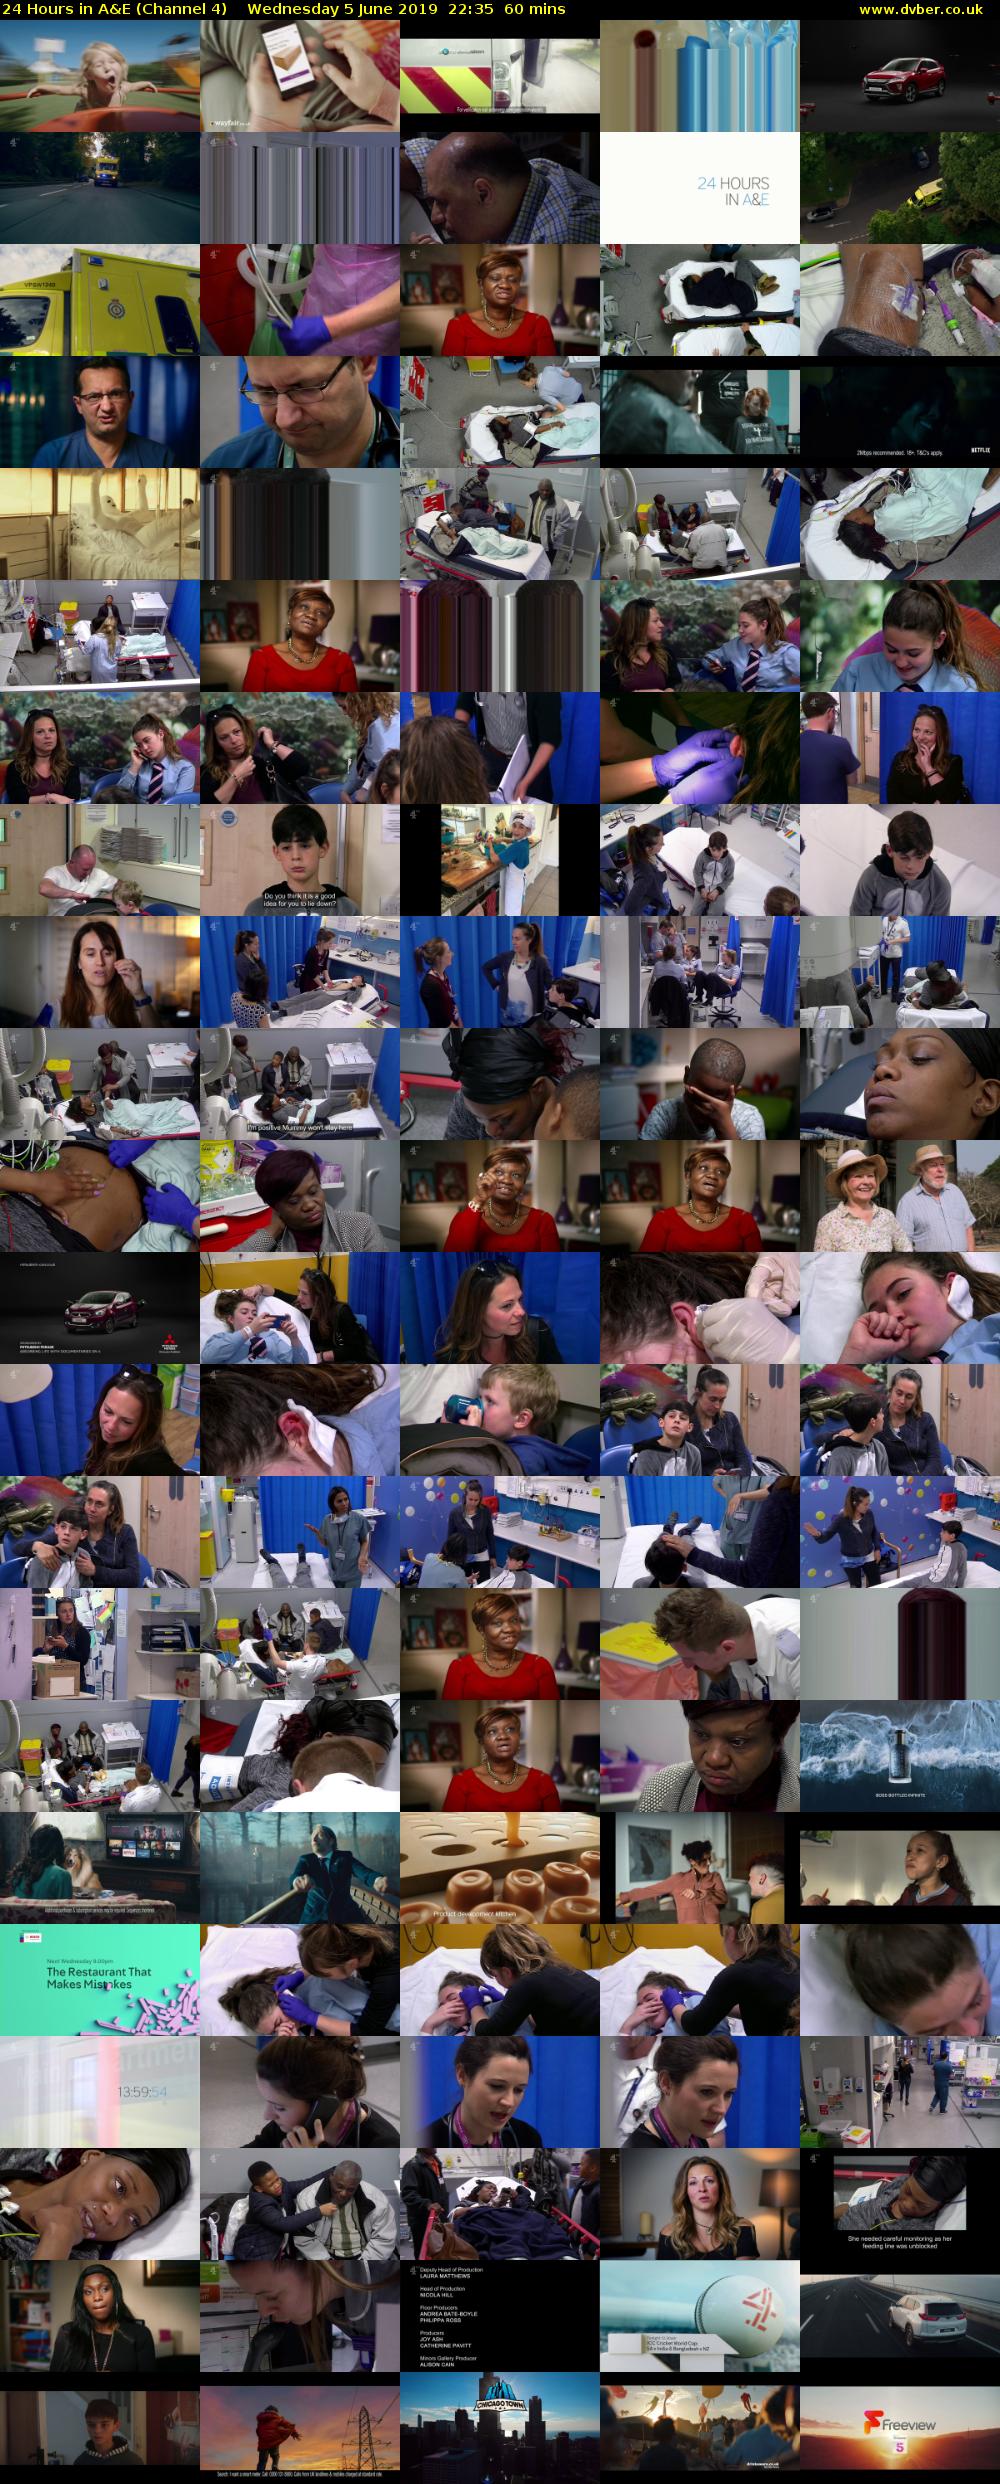 24 Hours in A&E (Channel 4) Wednesday 5 June 2019 22:35 - 23:35